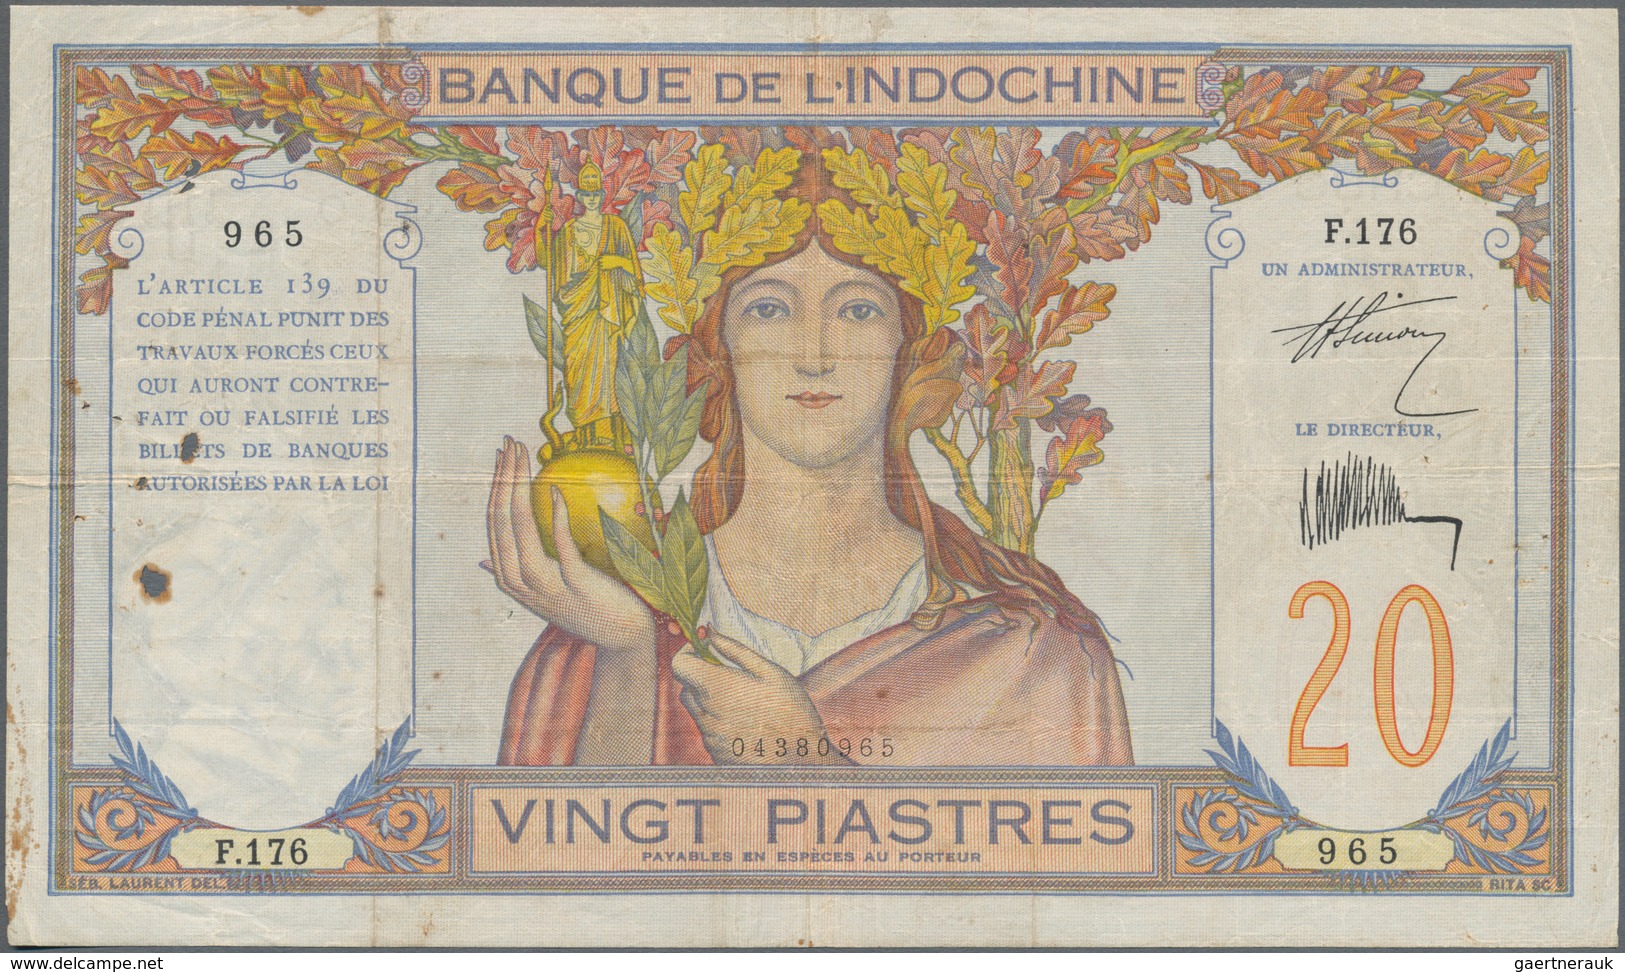 French Indochina / Französisch Indochina: Banque de l'Indo-Chine set with 6 banknotes of the ND(1921